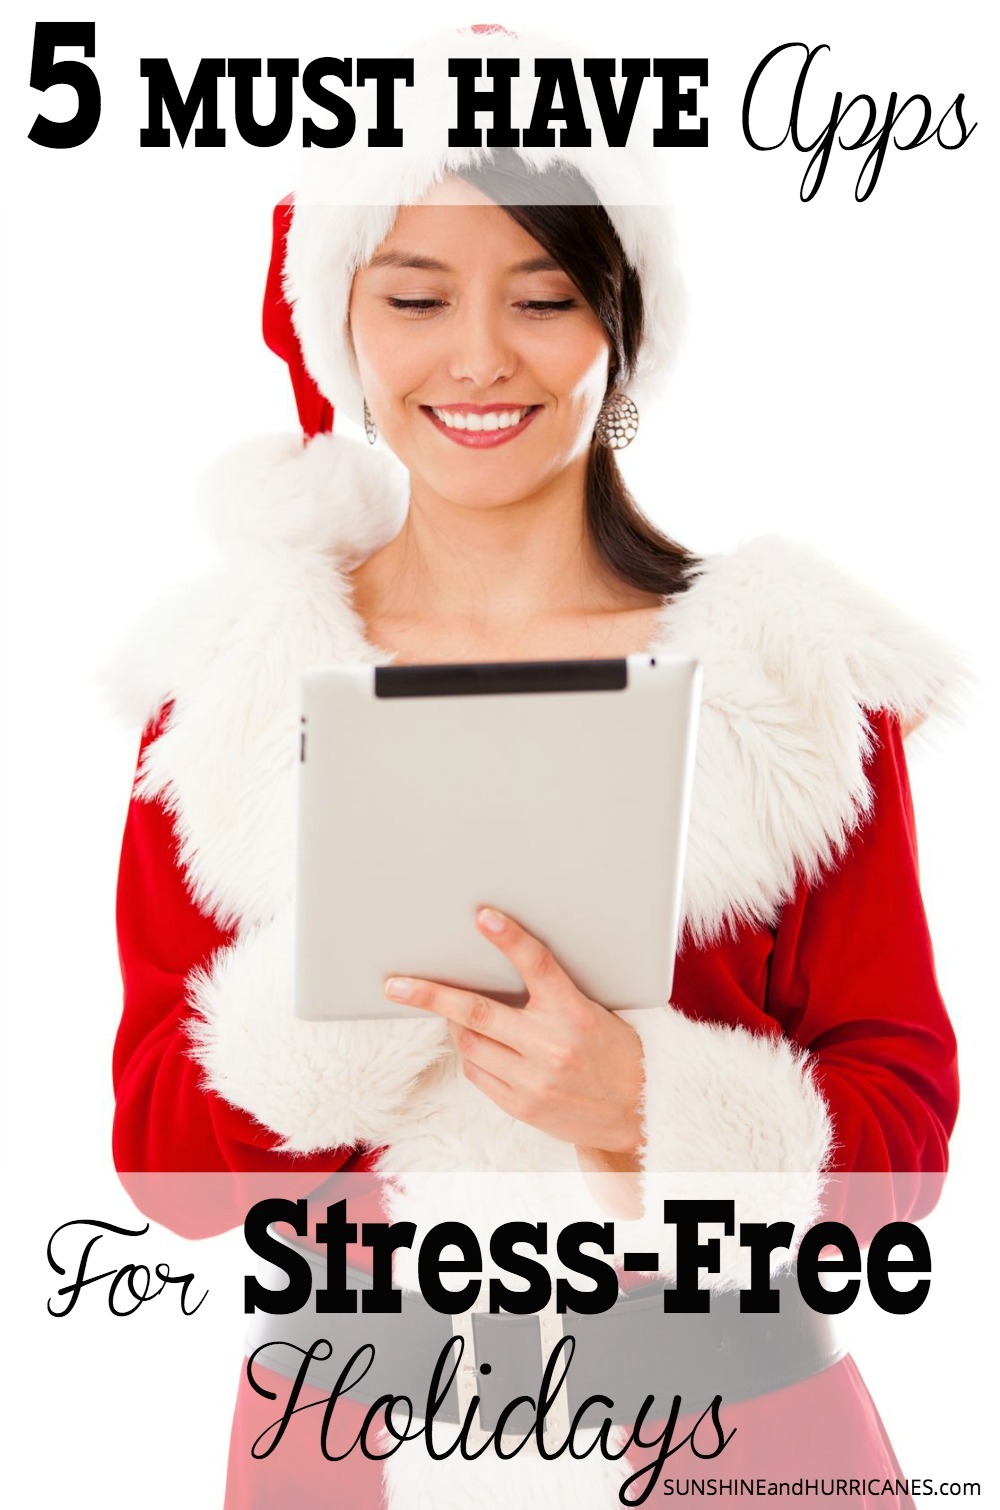 Do the holidays stress you out? Does if feel like you can't get organized and you'll never get everything done? Bring the happy back to your holidays with these 5 apps that will help you get everything under control from gift giving to party planning and even holiday travel. Get out of your grinchy groove and get back to the joy of the season. 5 Must Have Holiday Apps to make the season less stressful. SunshineandHurricanes.com